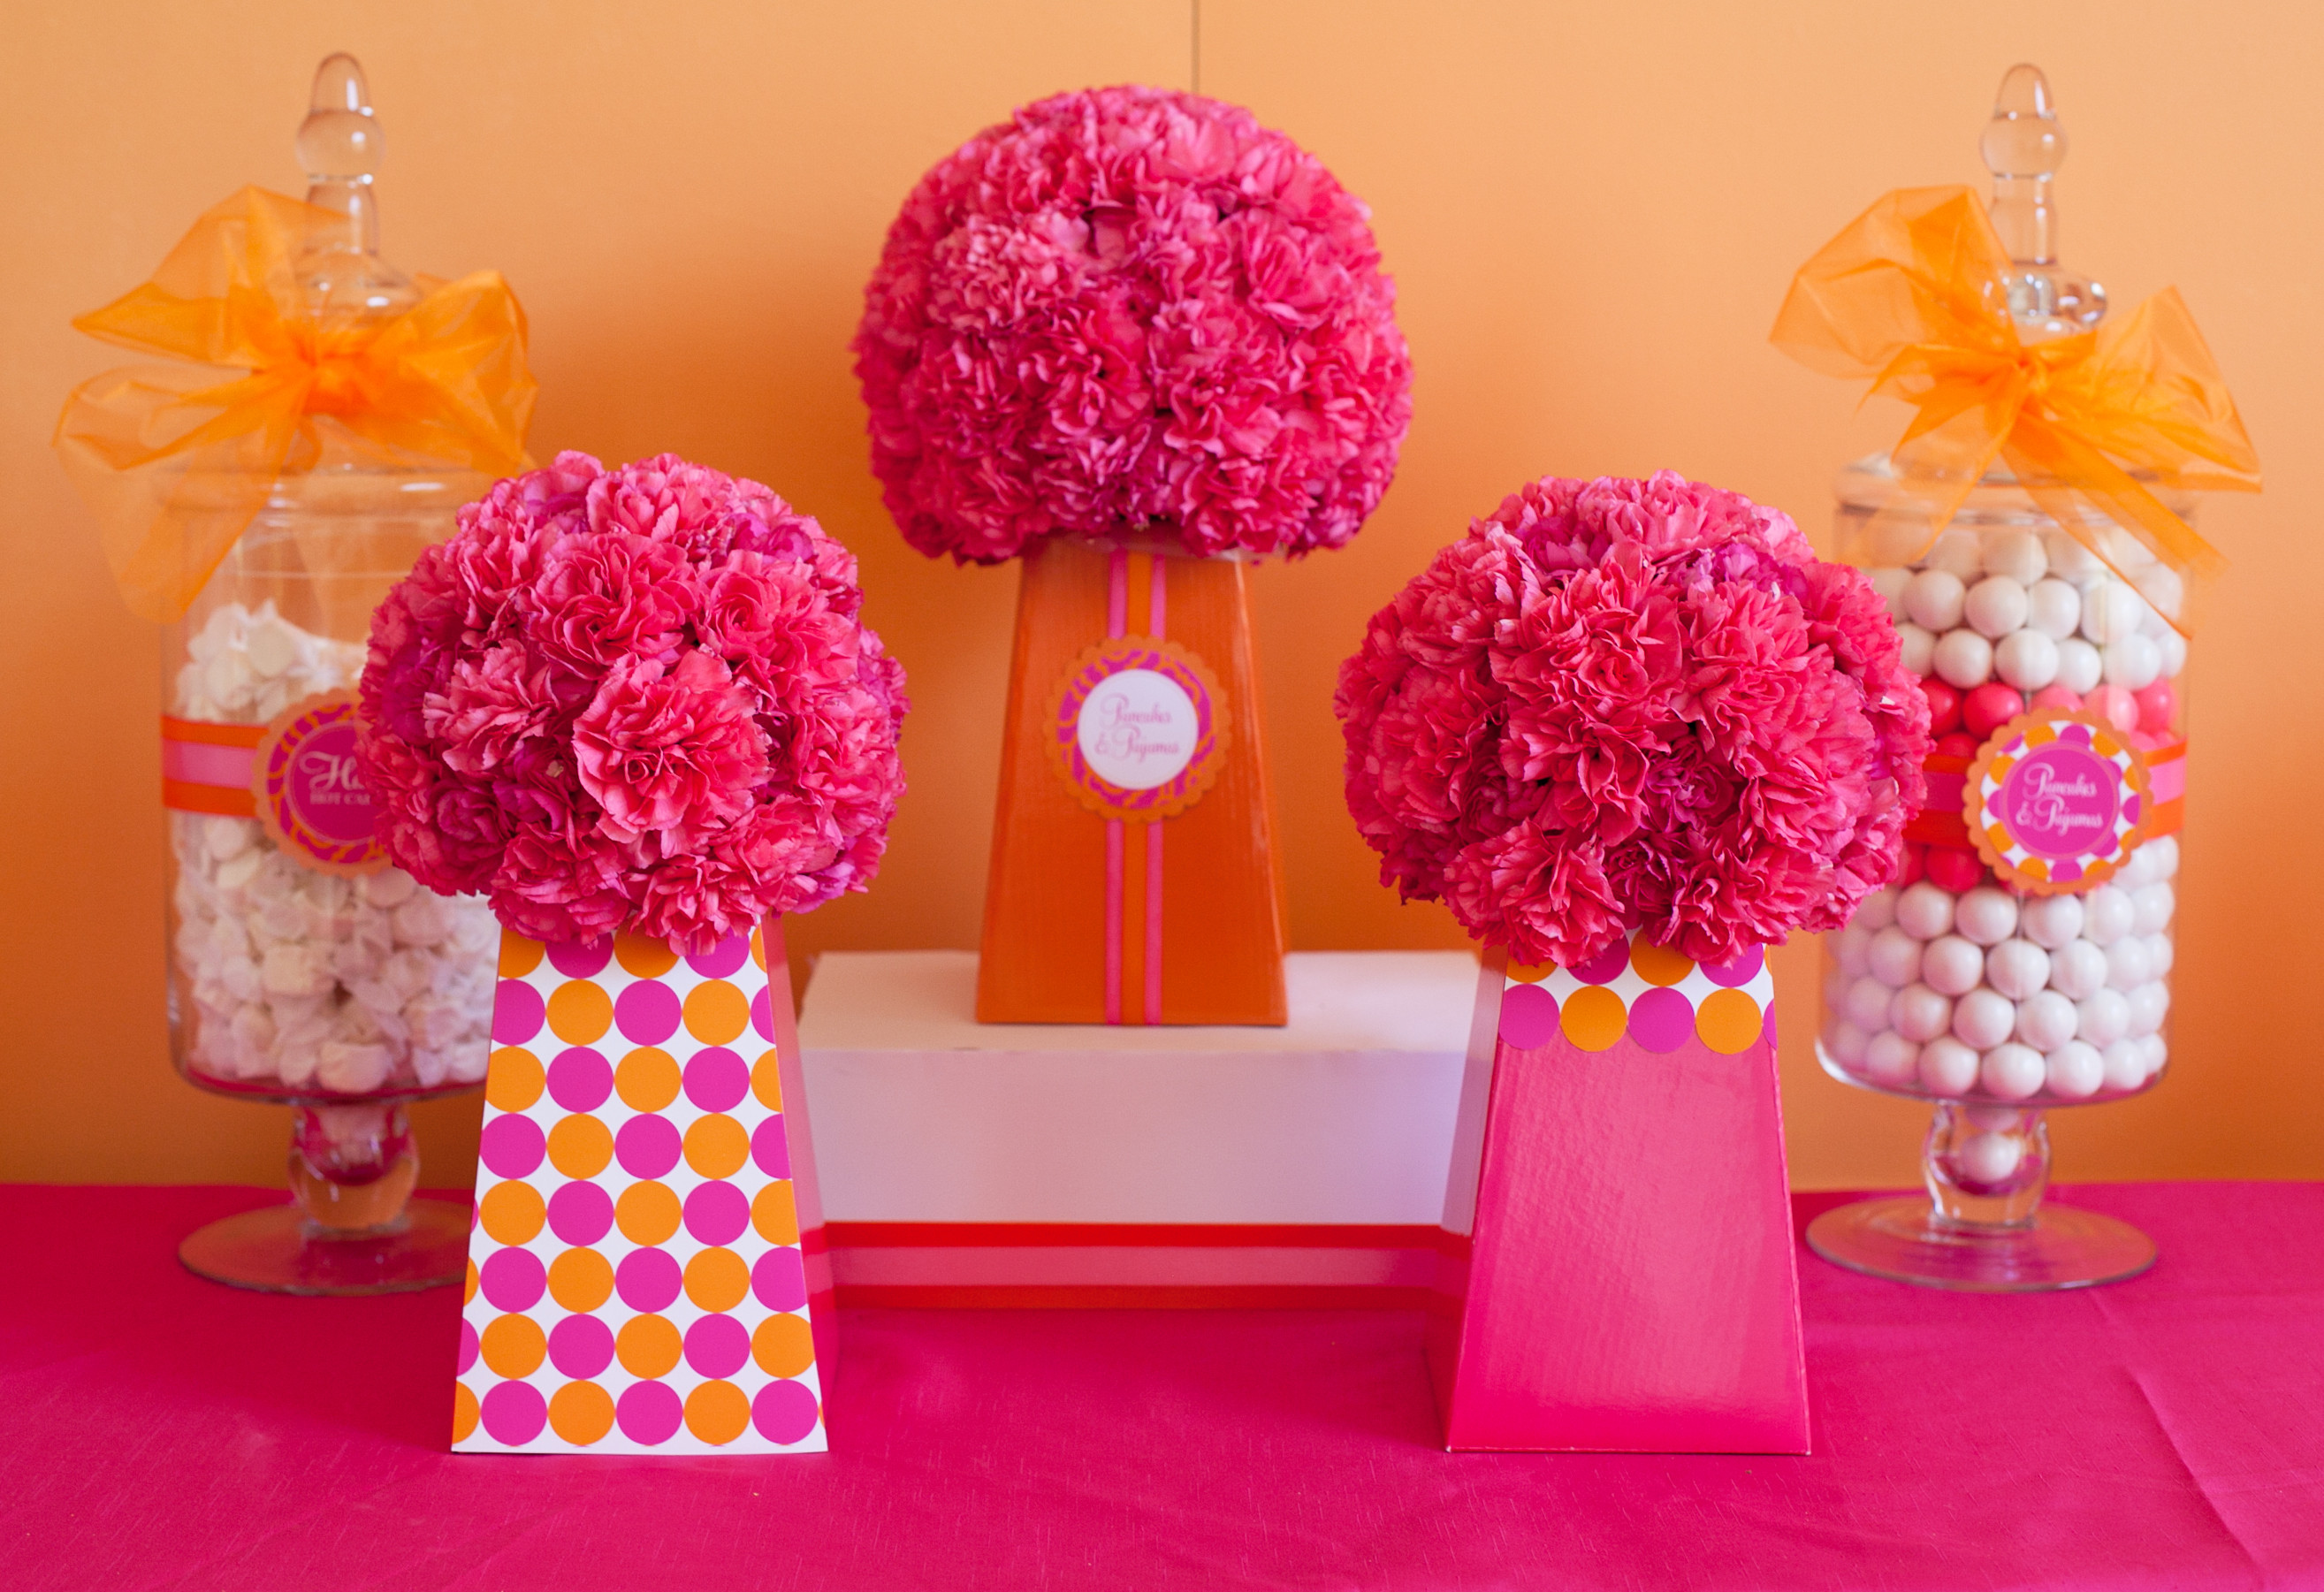 Birthday Party Table Decorations Centerpieces
 35 Ultimate DIY Table Ideas For A Birthday Party